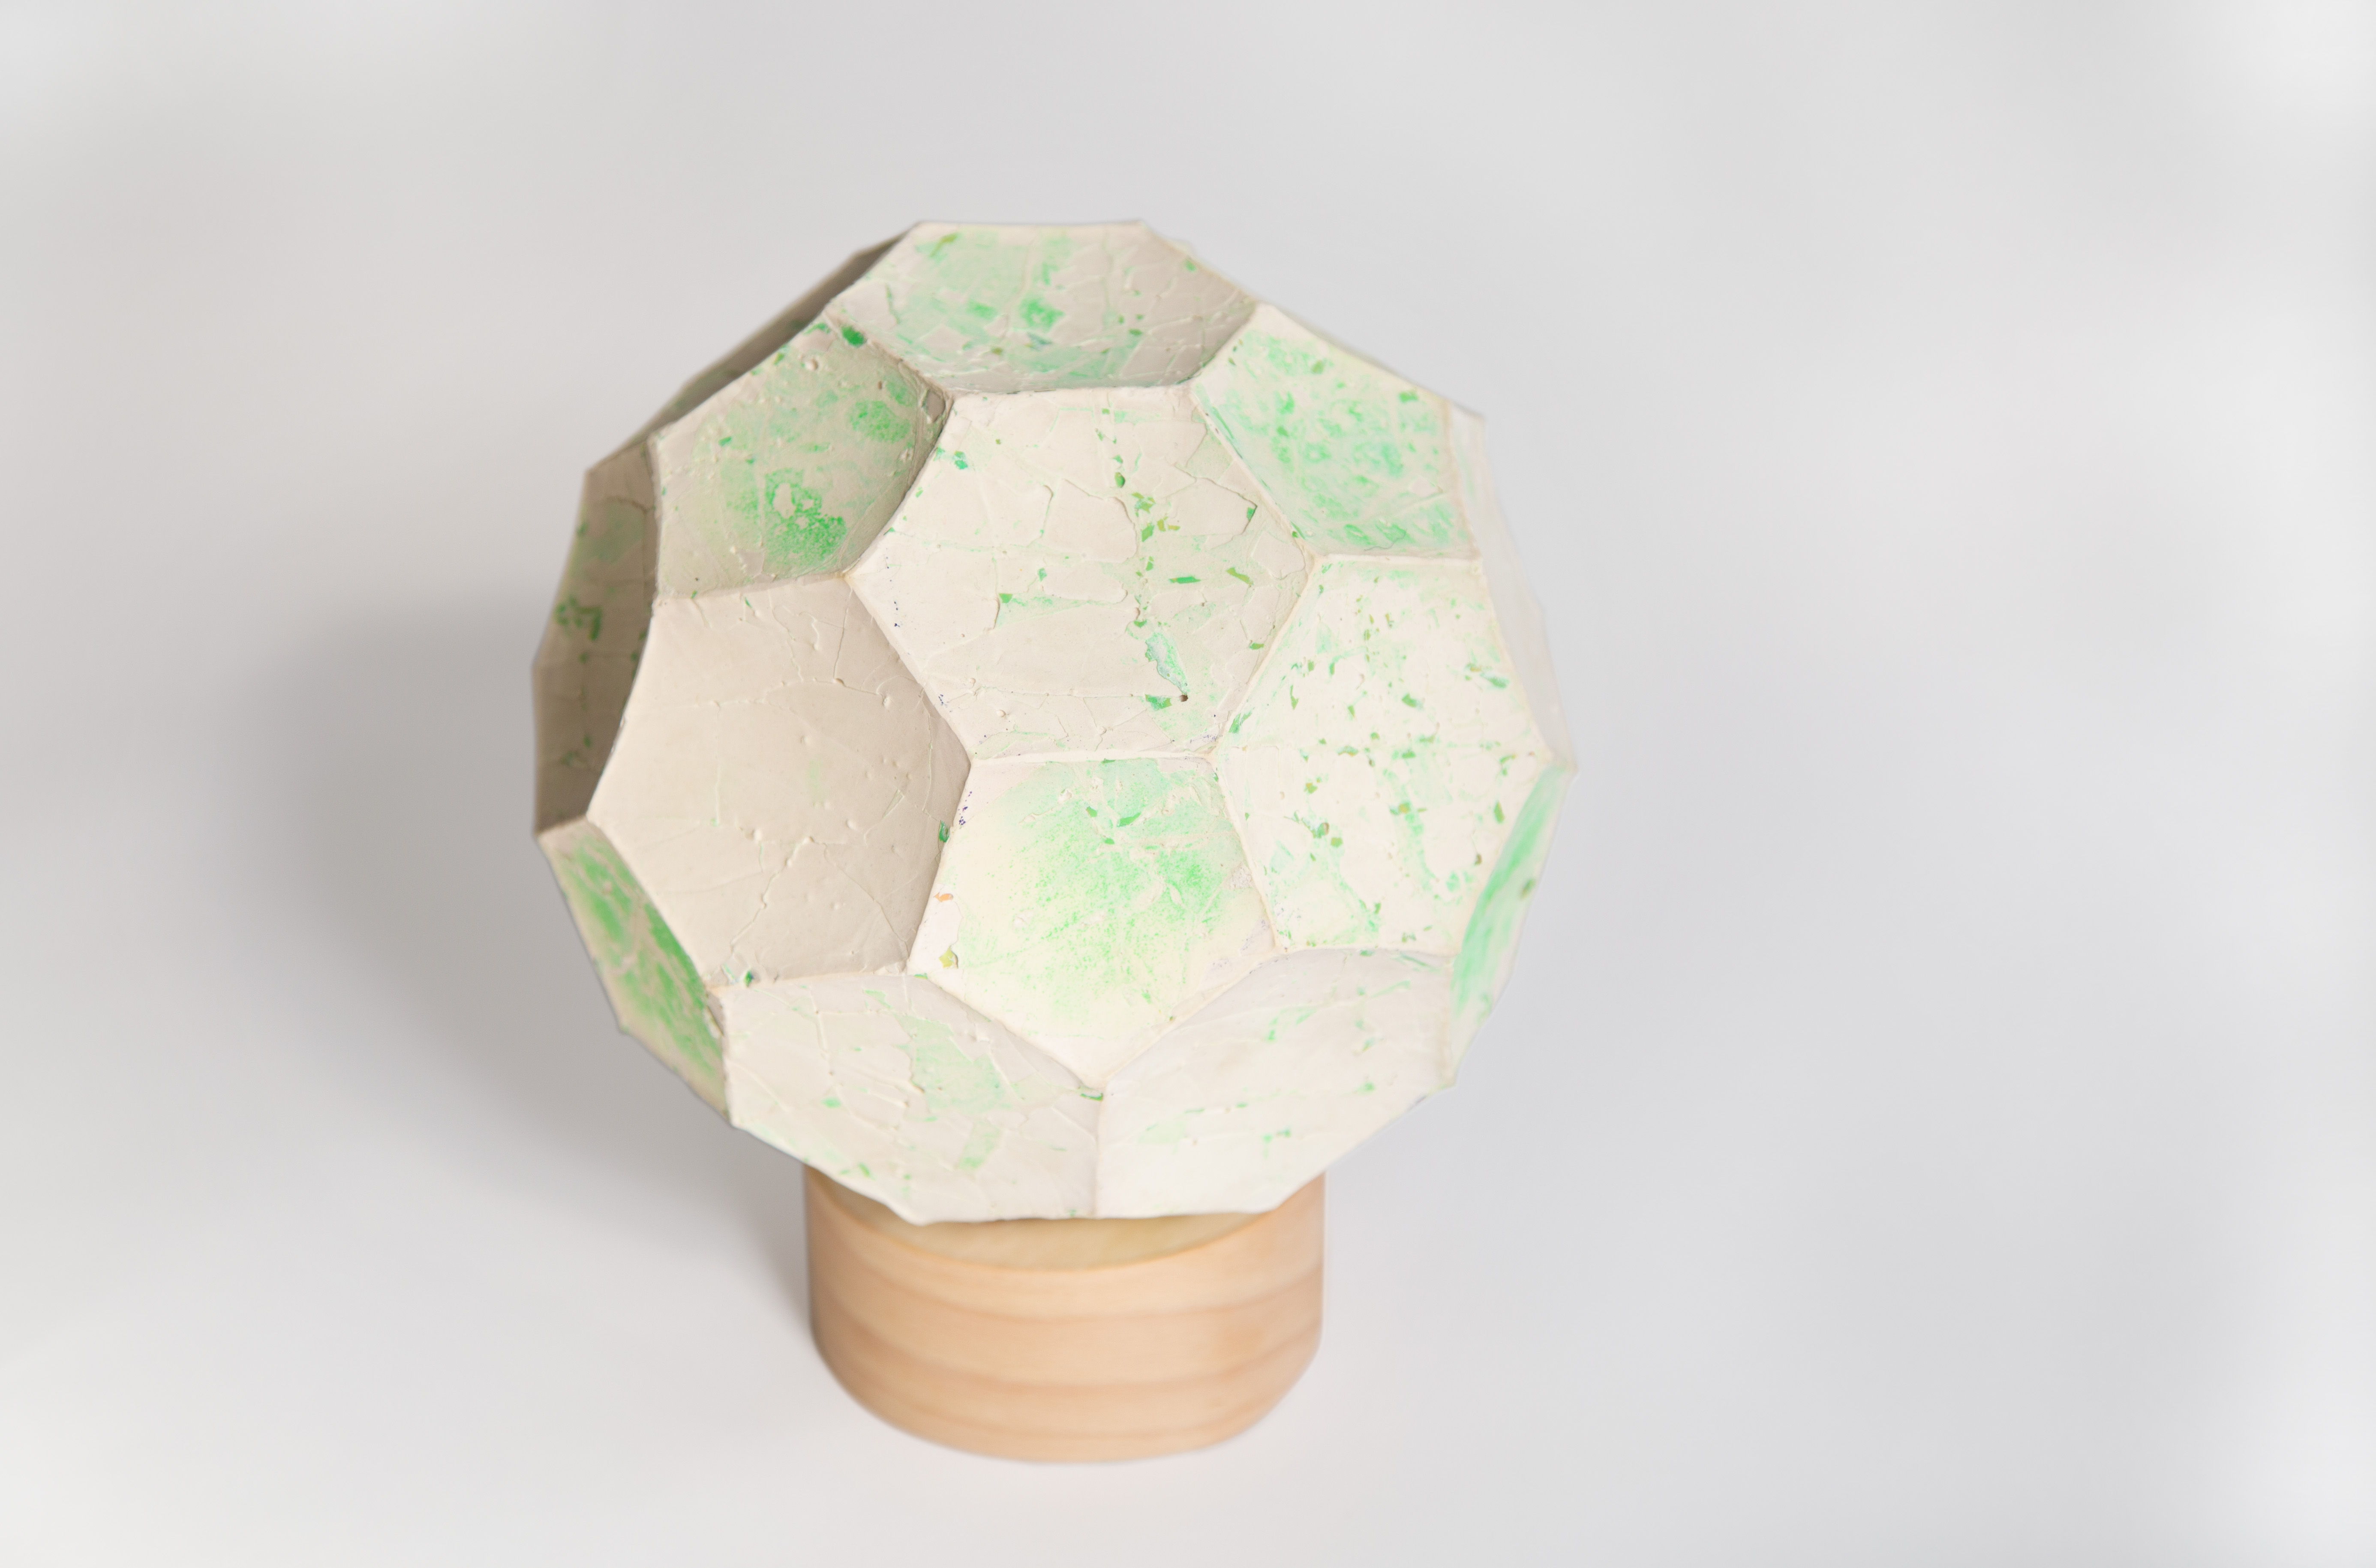 Lucky’s Ball – casted by Thomas Thwaites, part of R for Repair 2022. Image by Zuketa Film Production